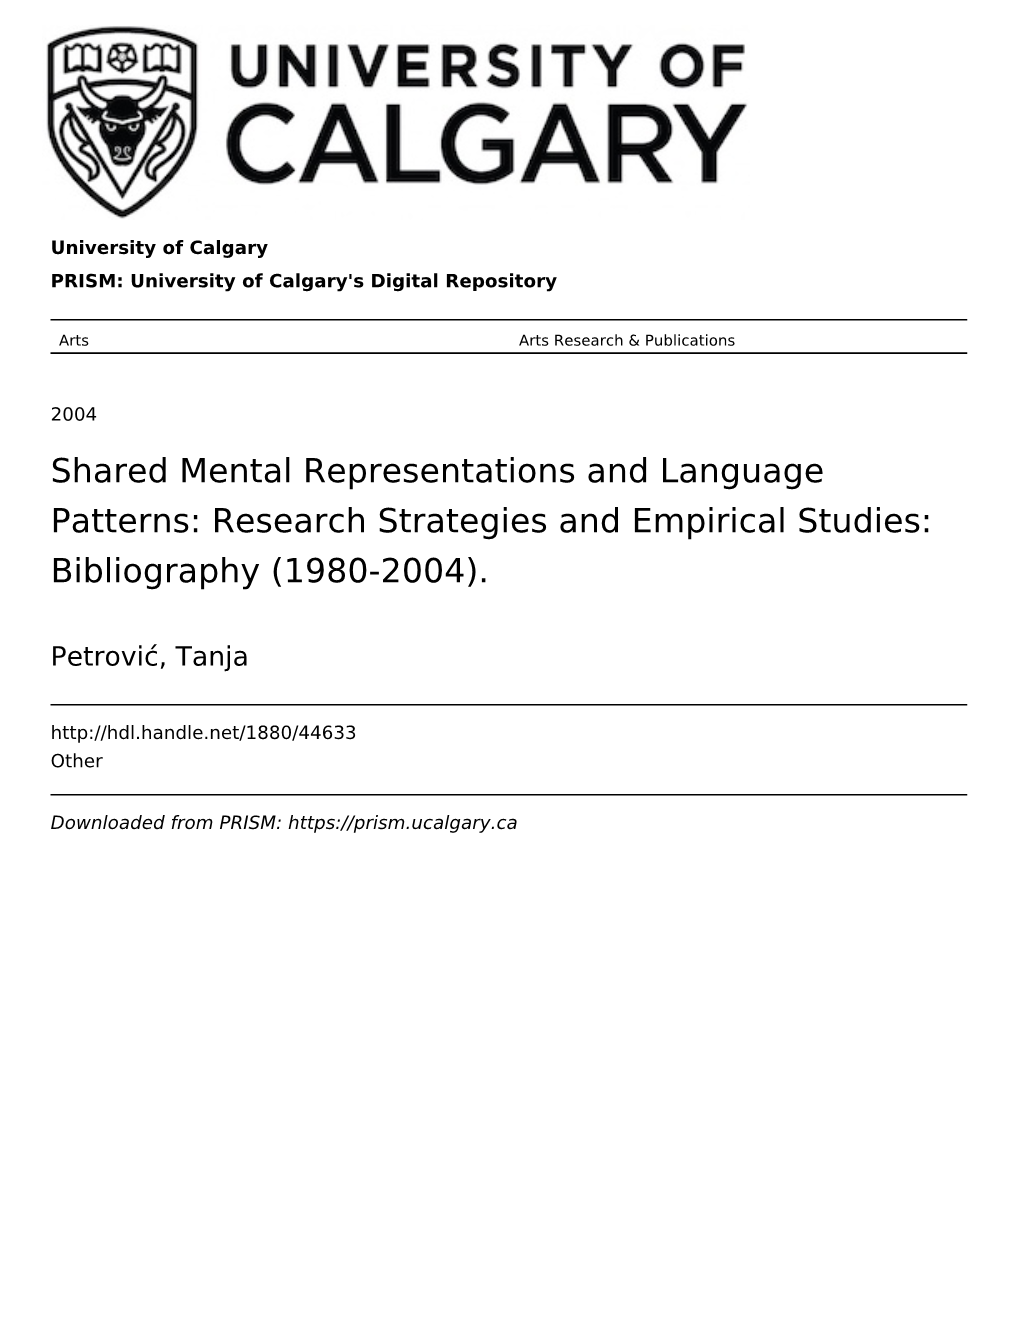 Shared Mental Representations and Language Patterns: Research Strategies and Empirical Studies: Bibliography (1980-2004)